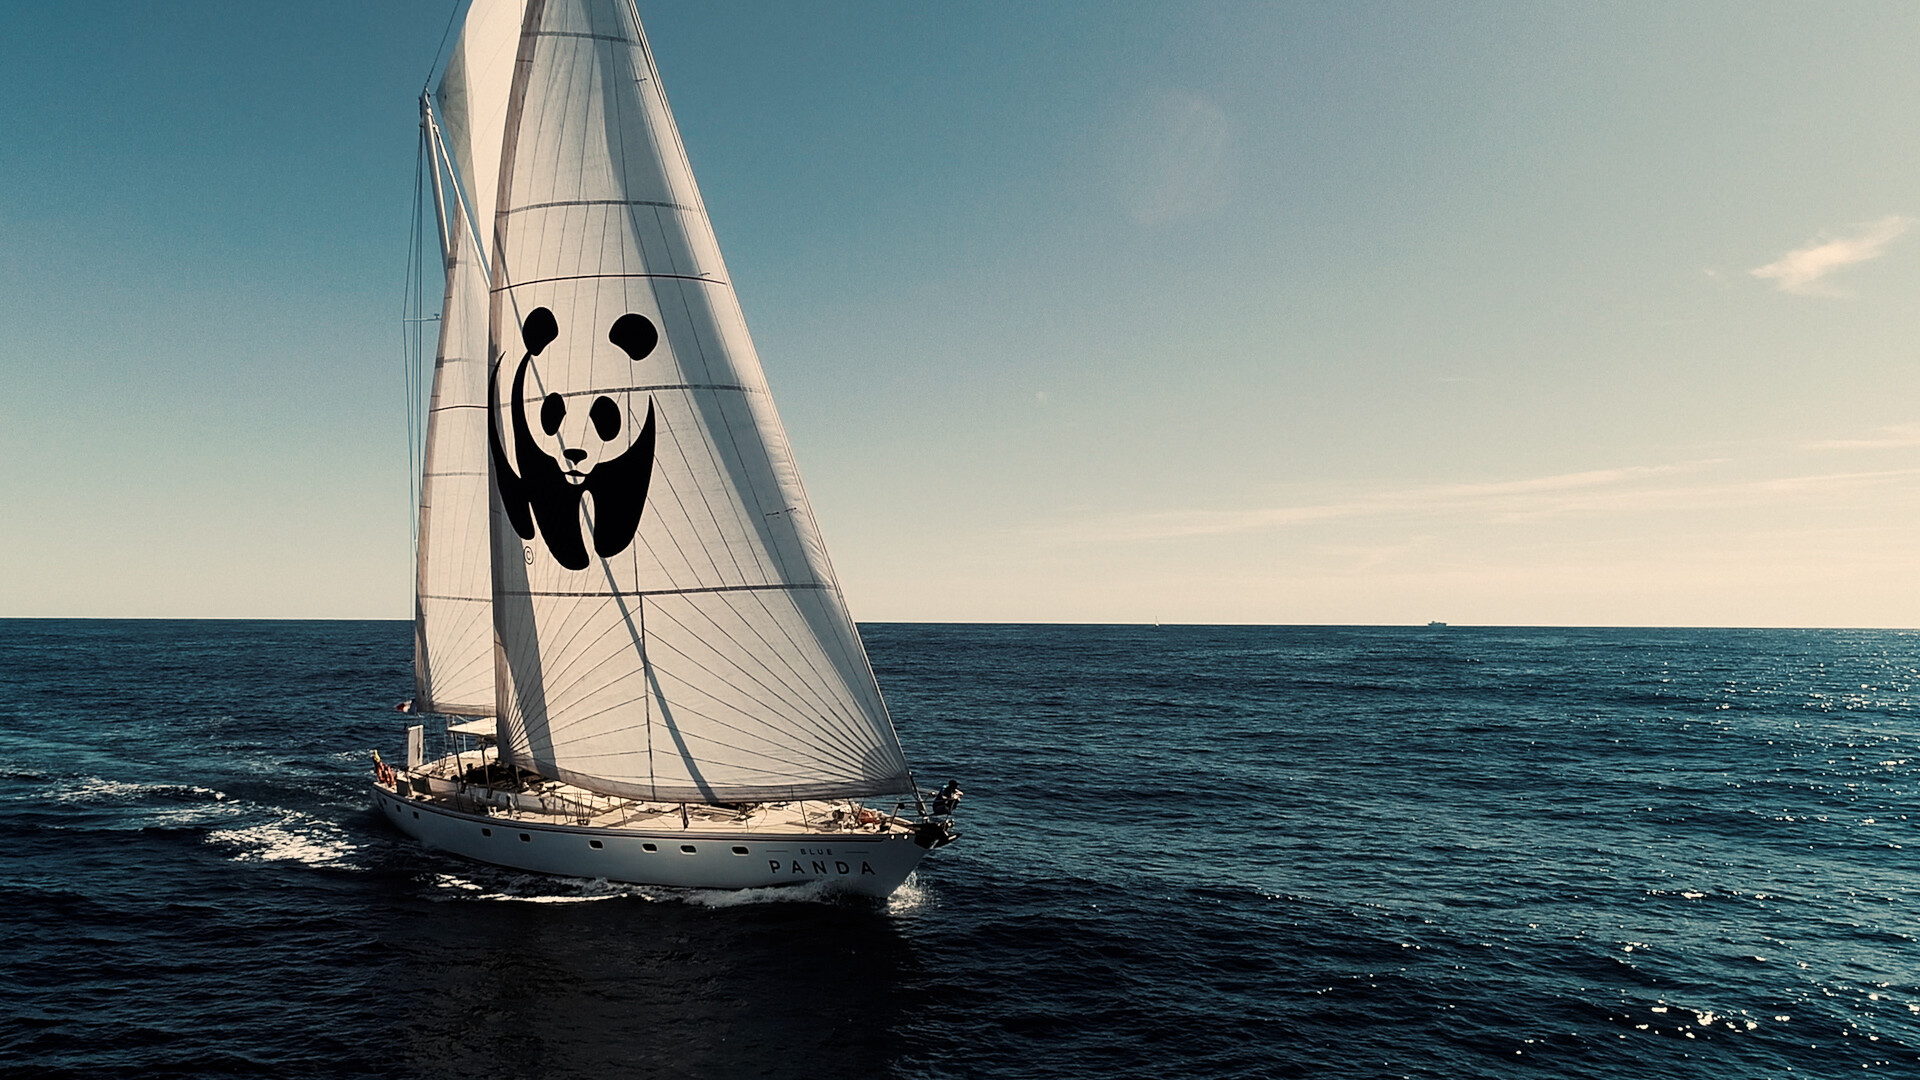 Boat with white sail with WWF panda on water